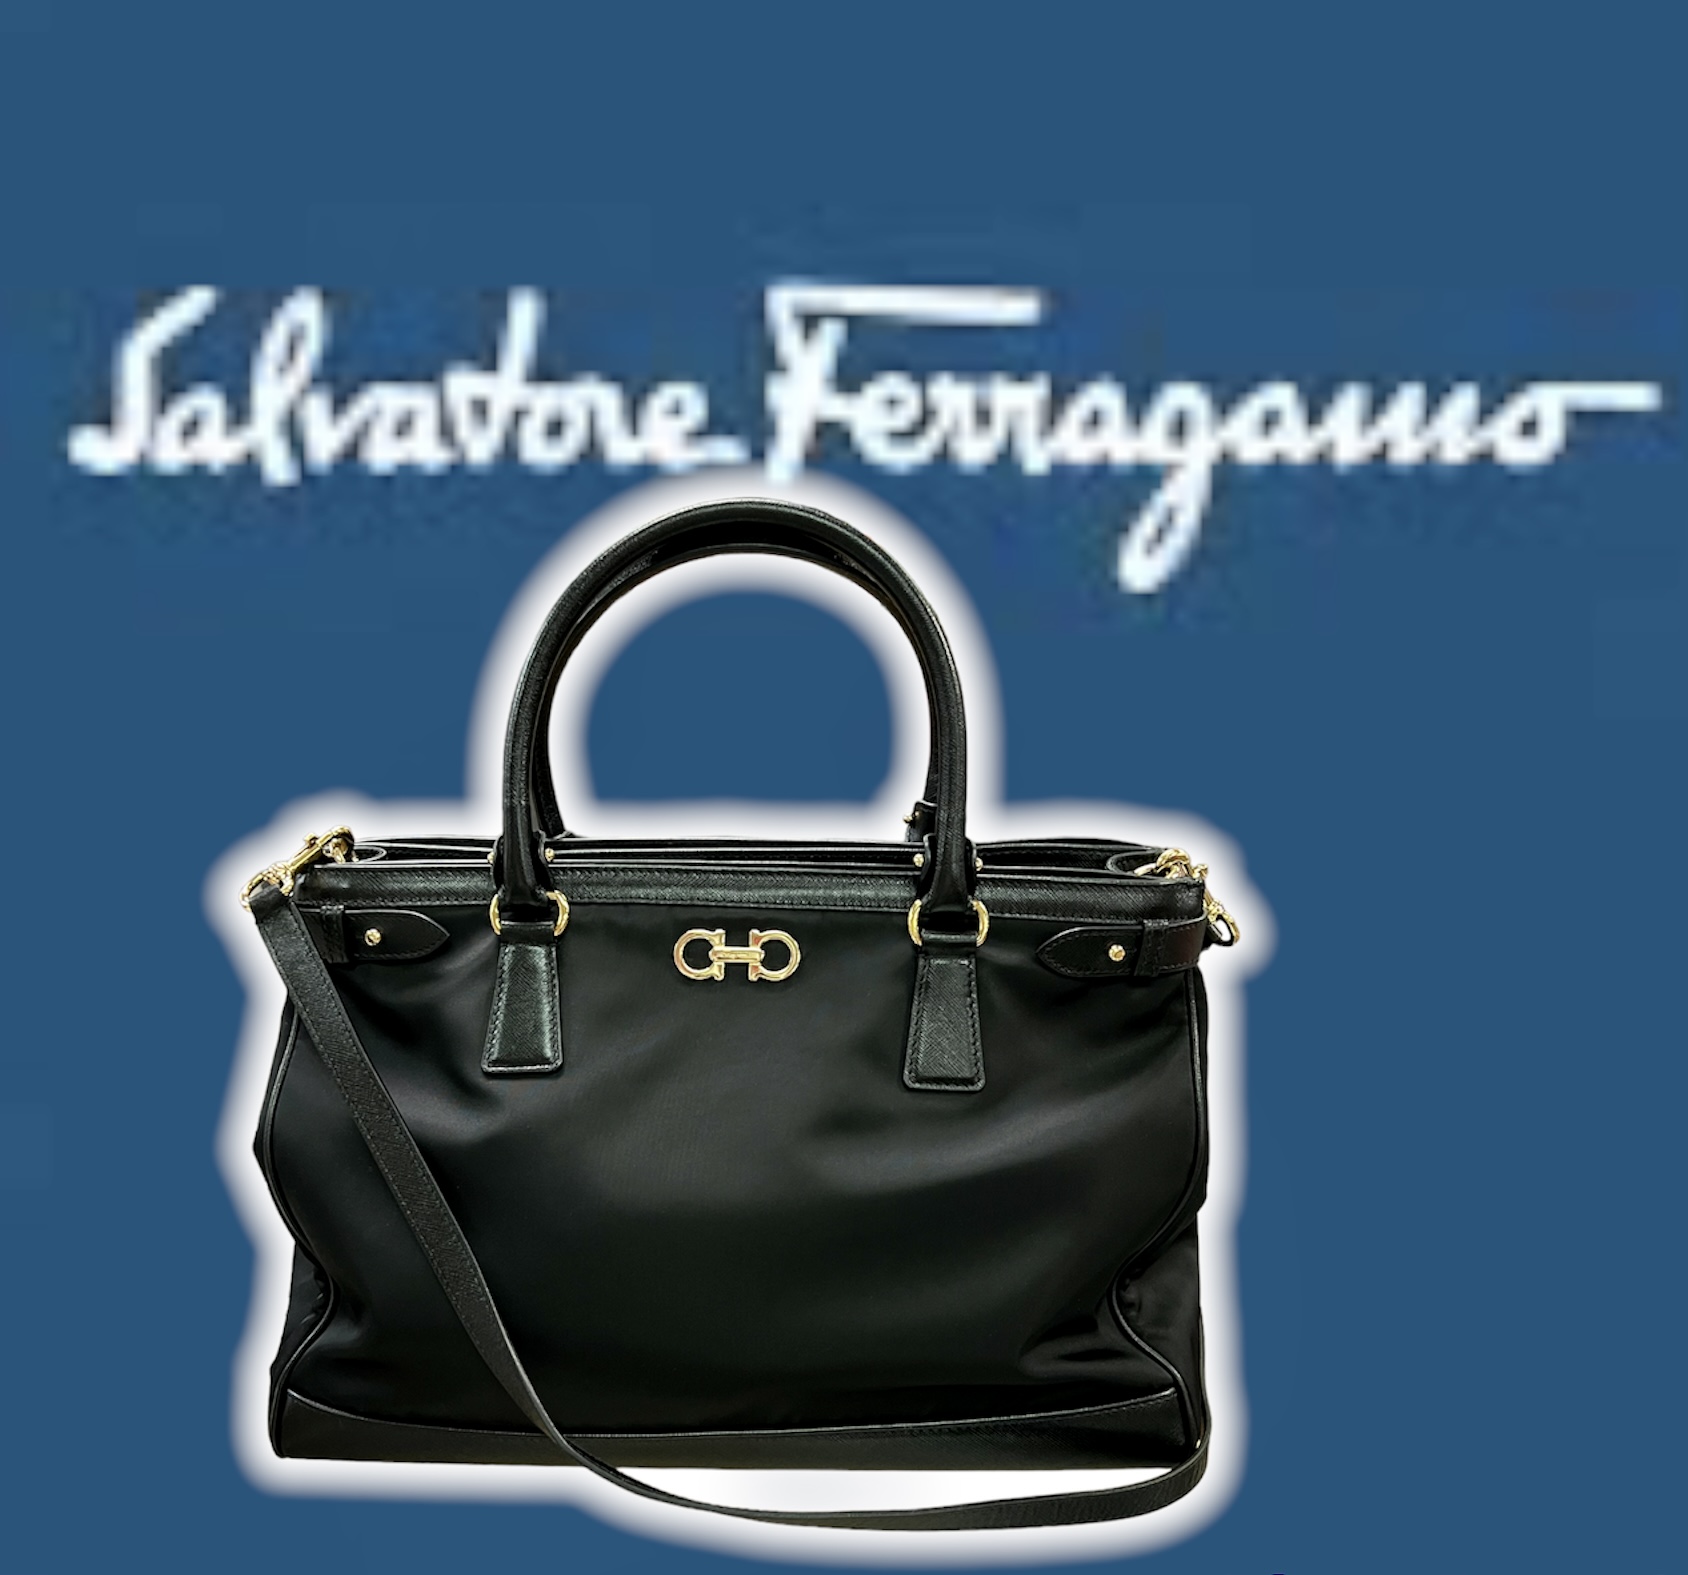 Salvatore Ferragamo -
Nylon Hammered Calfskin Batik Tote Black
This is an authentic SALVATORE FERRAGAMO Nylon Batik Tote in Black. This stylish bag is crafted of nylon canvas with black calfskin leather in black with gold hardware, leather top handles, and a matching leather shoulder strap. The bag opens to a partitioned black fabric interior with a large pockets.
COMES with CERTIFICATE of AUTHENTICITY
Base length: 15 in
Height: 11 in
Width: 7 in
Drop: 5.25 in
Drop: 20.5 in
This tote is in like new condition with no signs of wear or flaws.